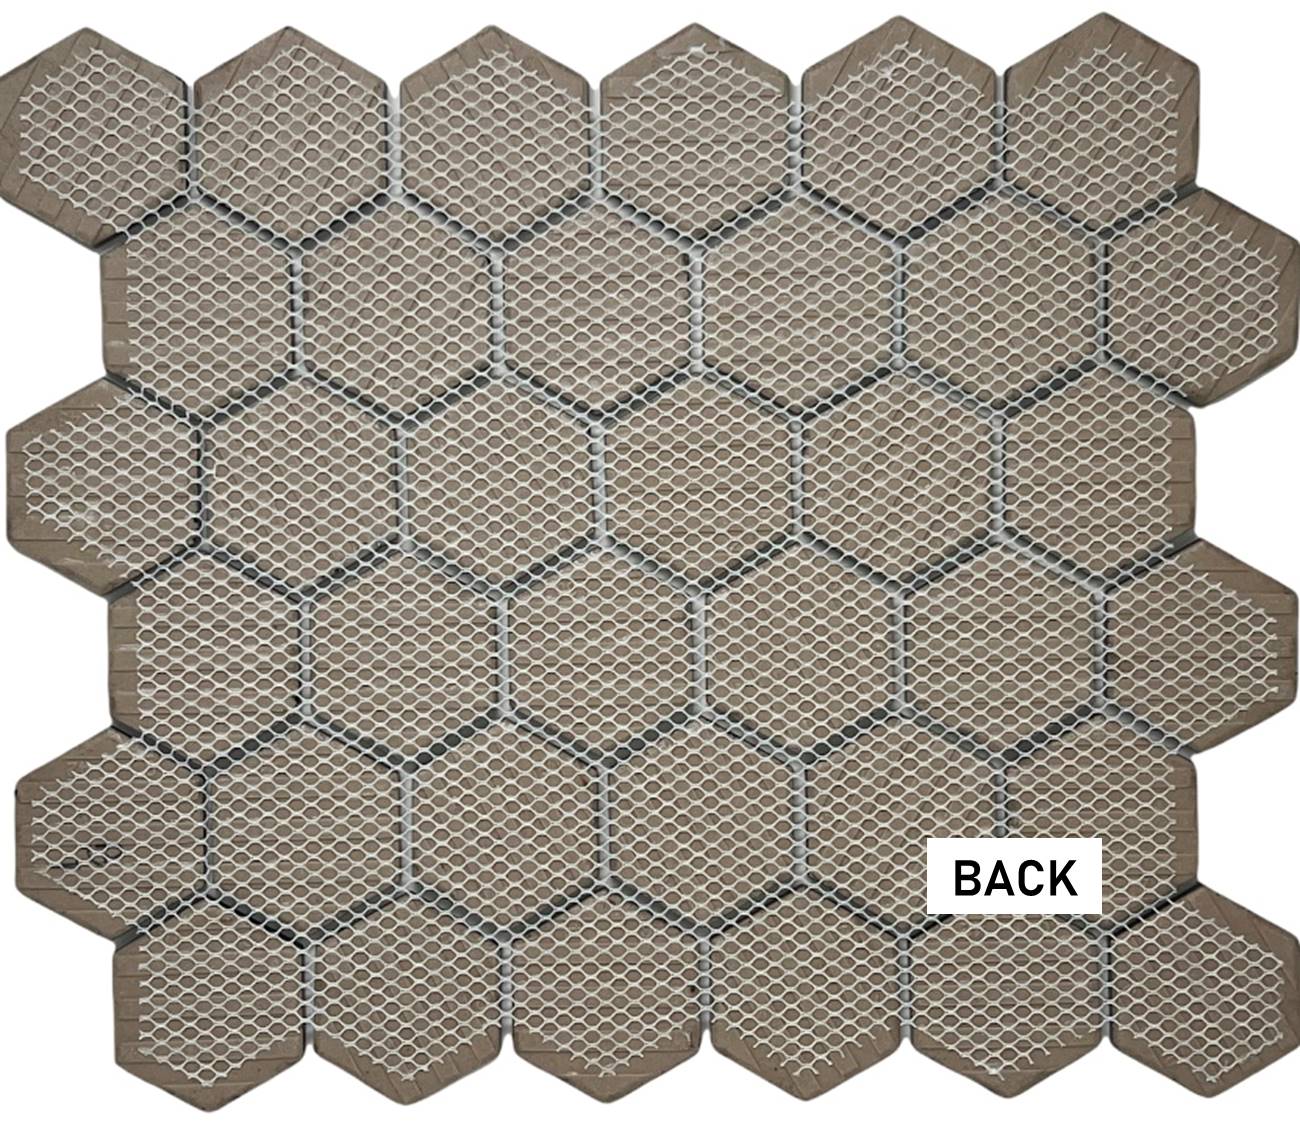 Hexagon 2 in. Black Glossy Porcelain Mosaic Floor Wall Tile for Bathroom Shower, Kitchen Backsplashes, Accent décor, Pool Tile by Tenedos